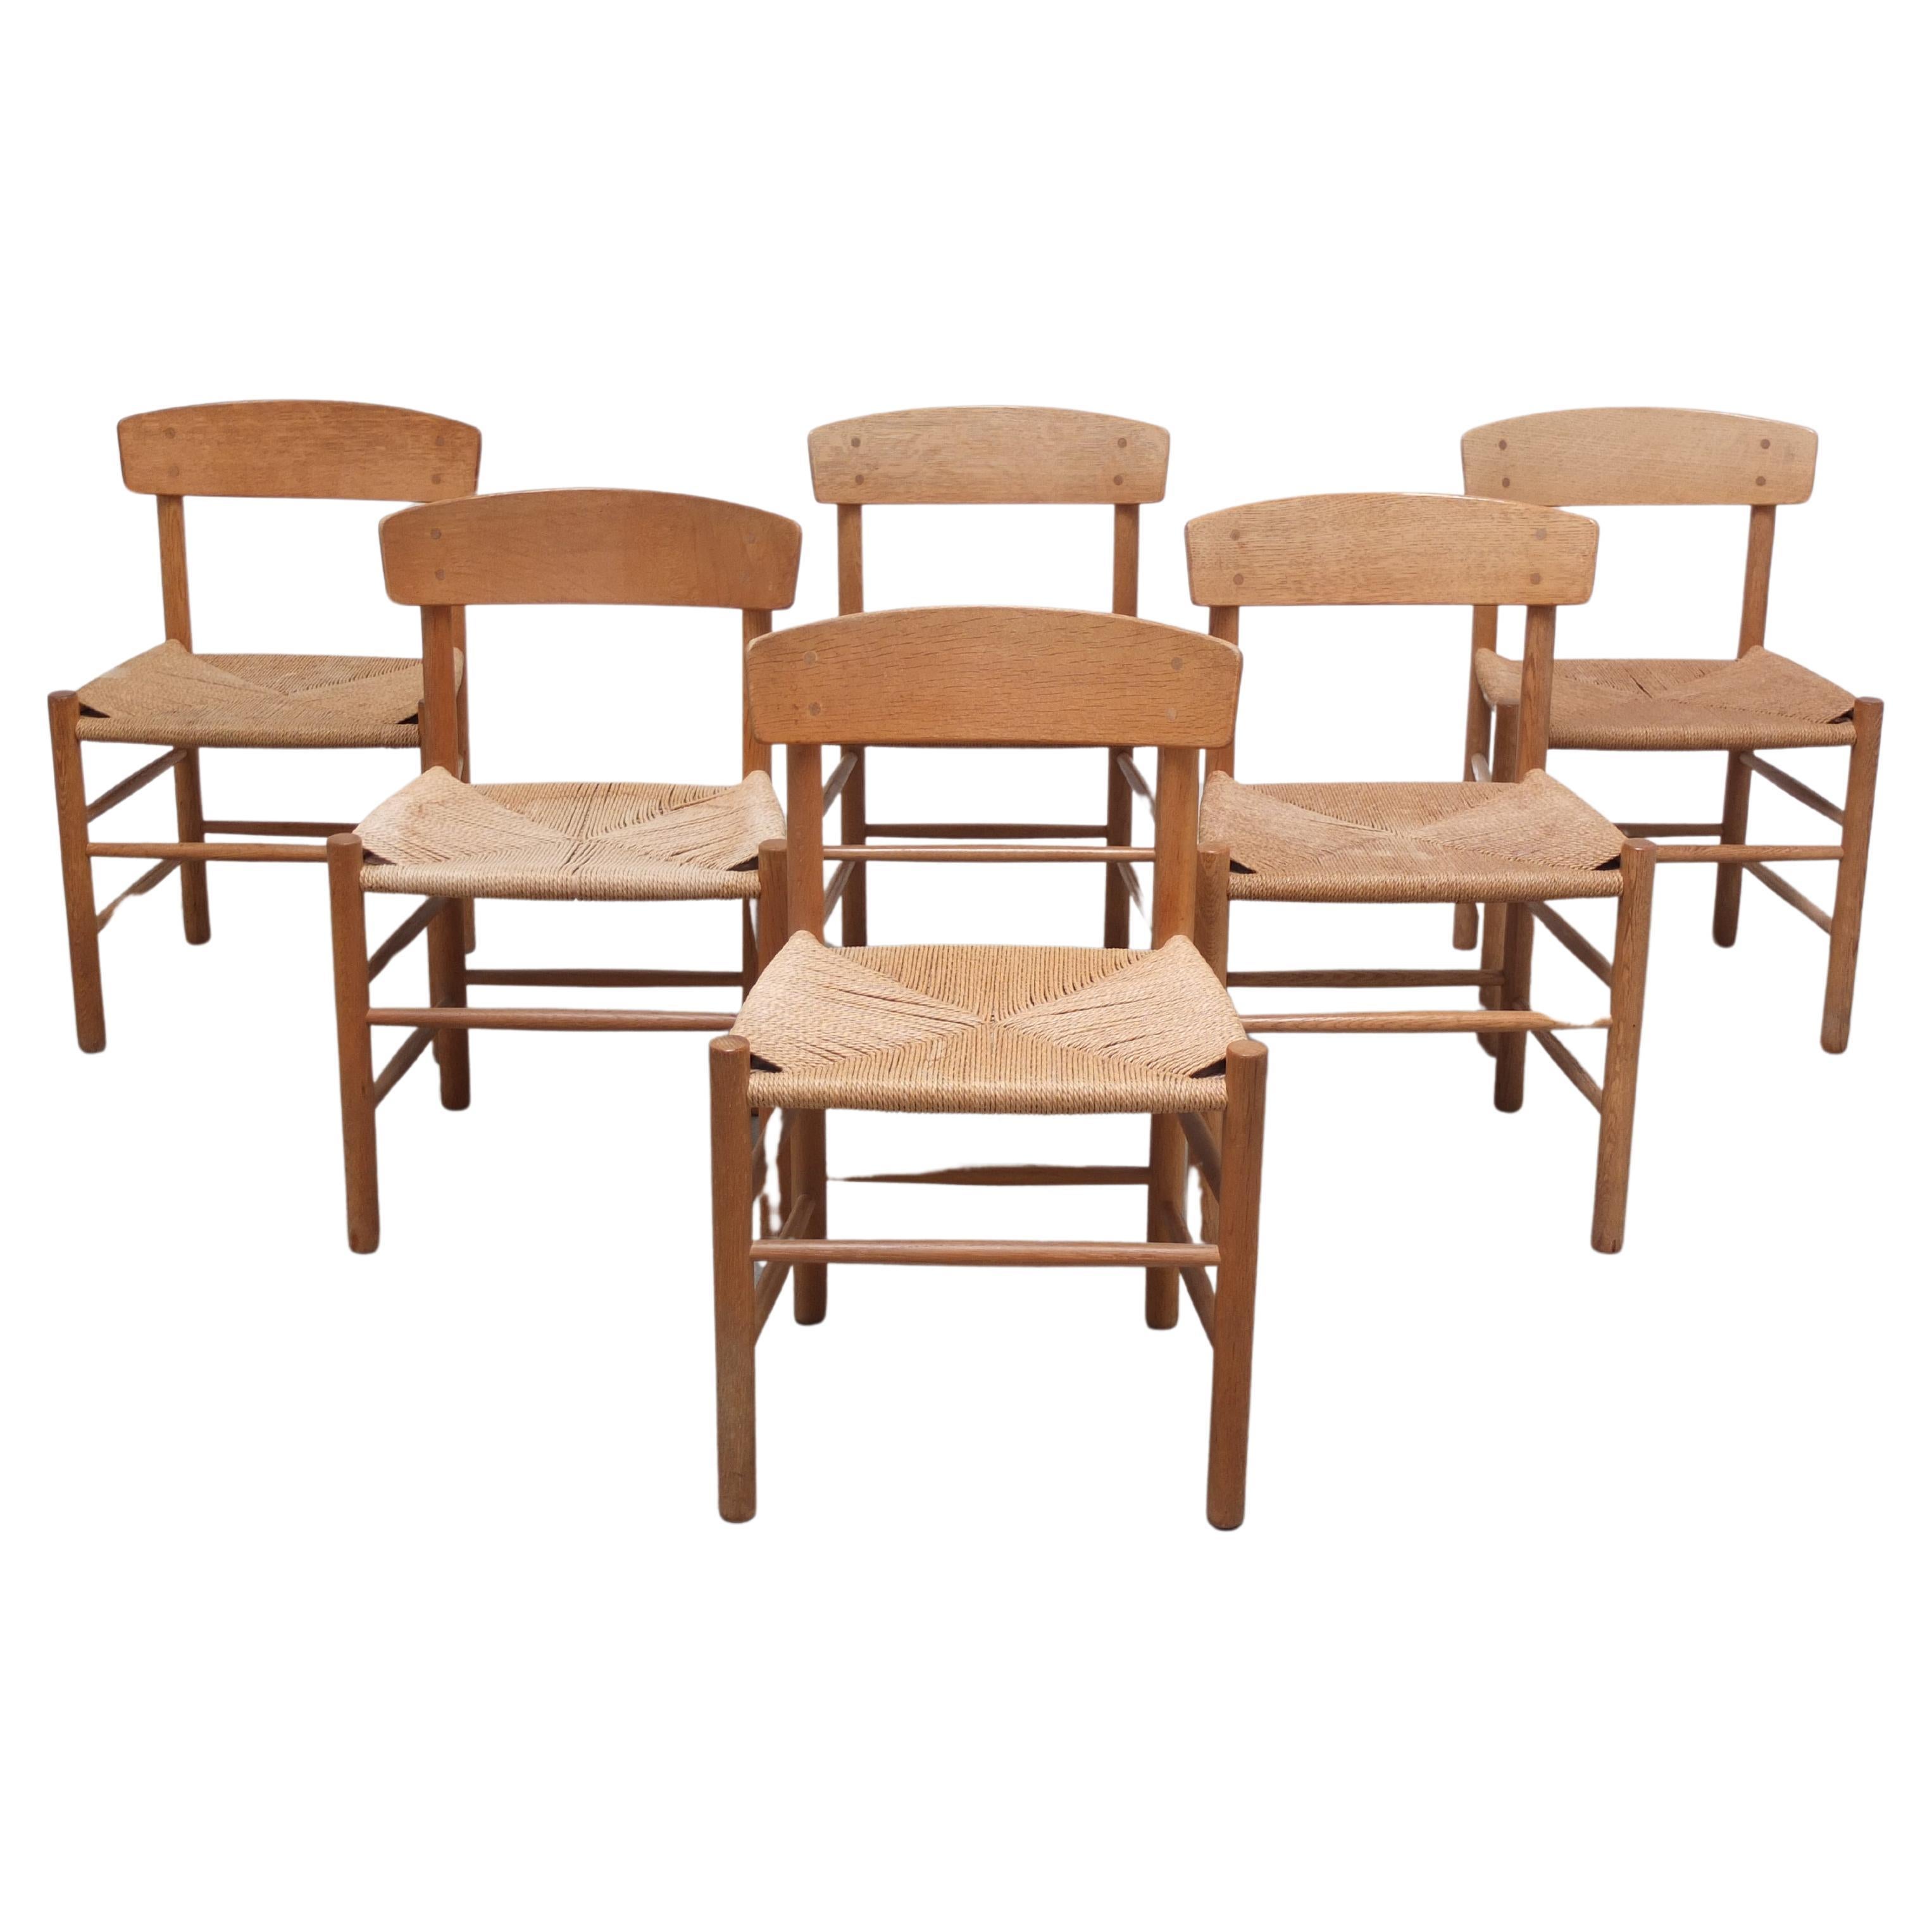 Early Set of 6 'J39' Dining Chairs by Børge Mogensen for FDB Møbler, 1947